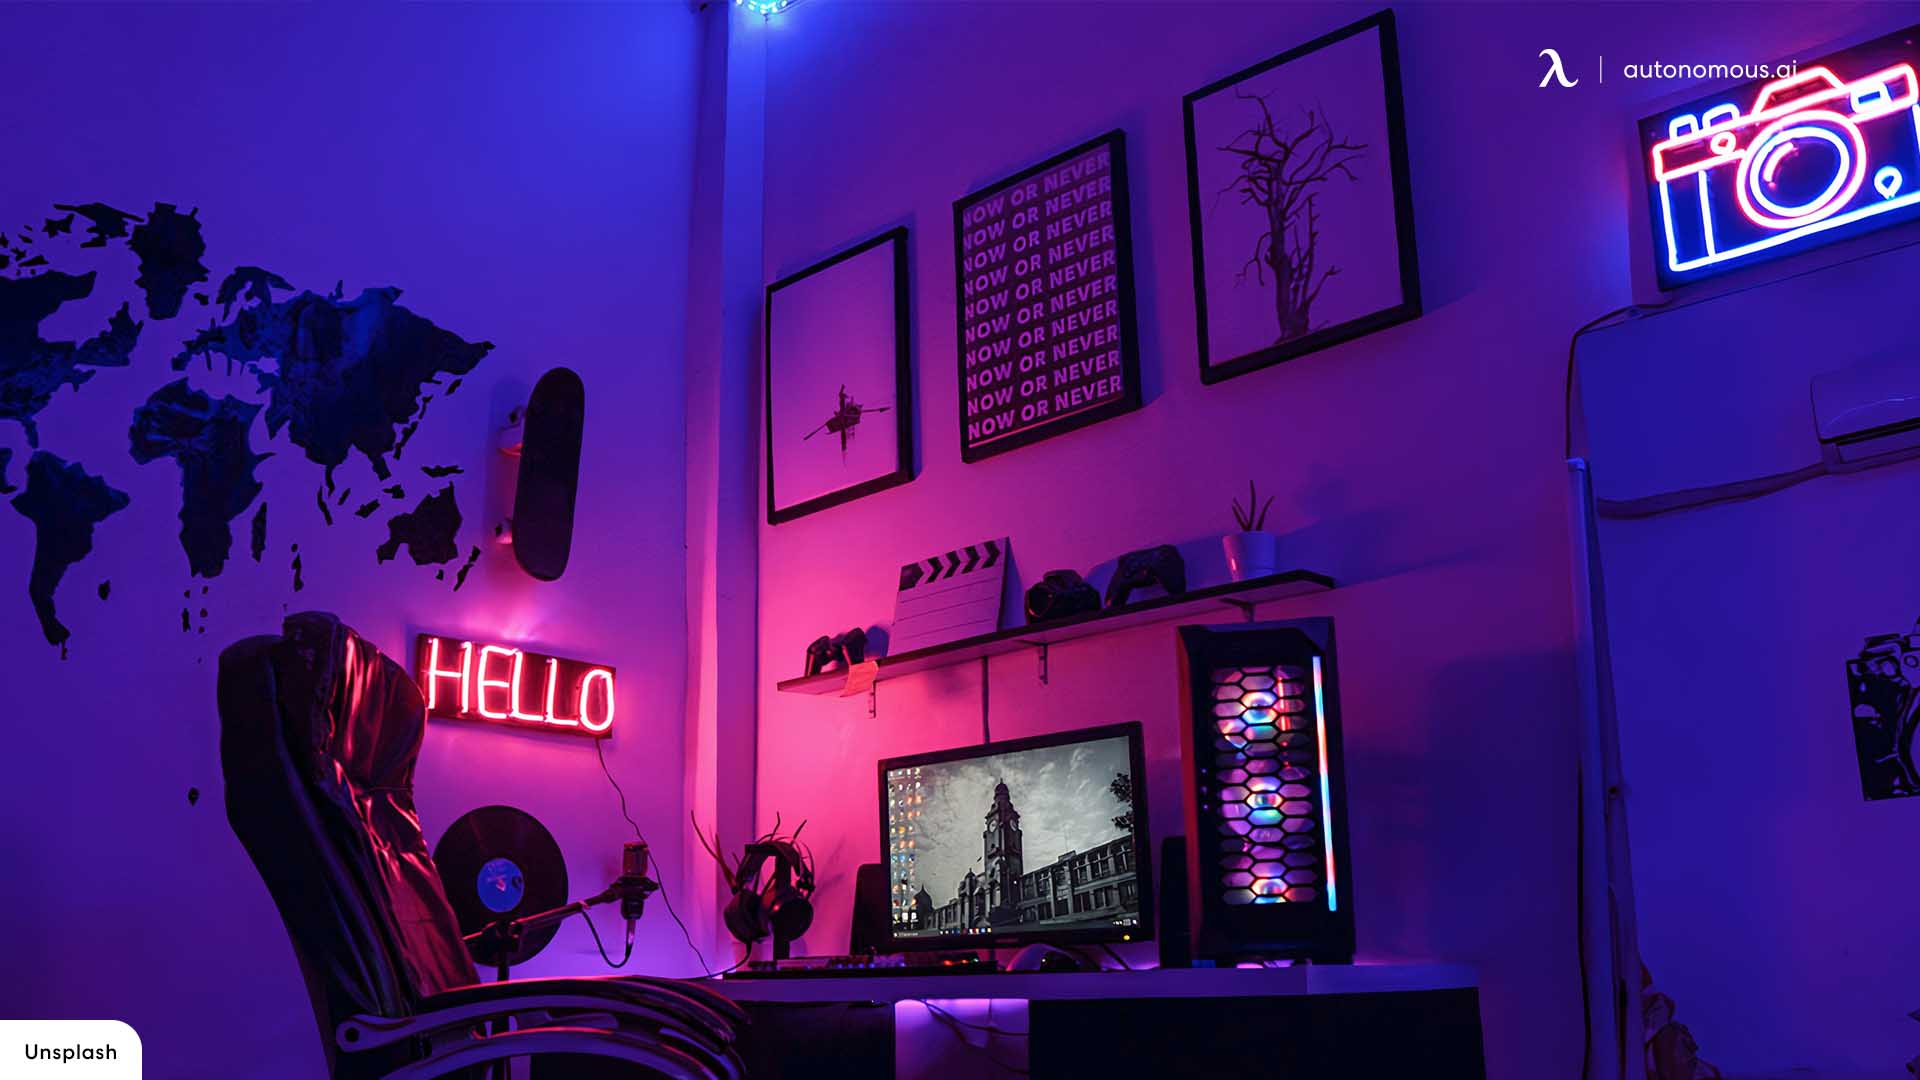 11 Amazing Gaming Lights for Decor (LED, RGB) in 2022